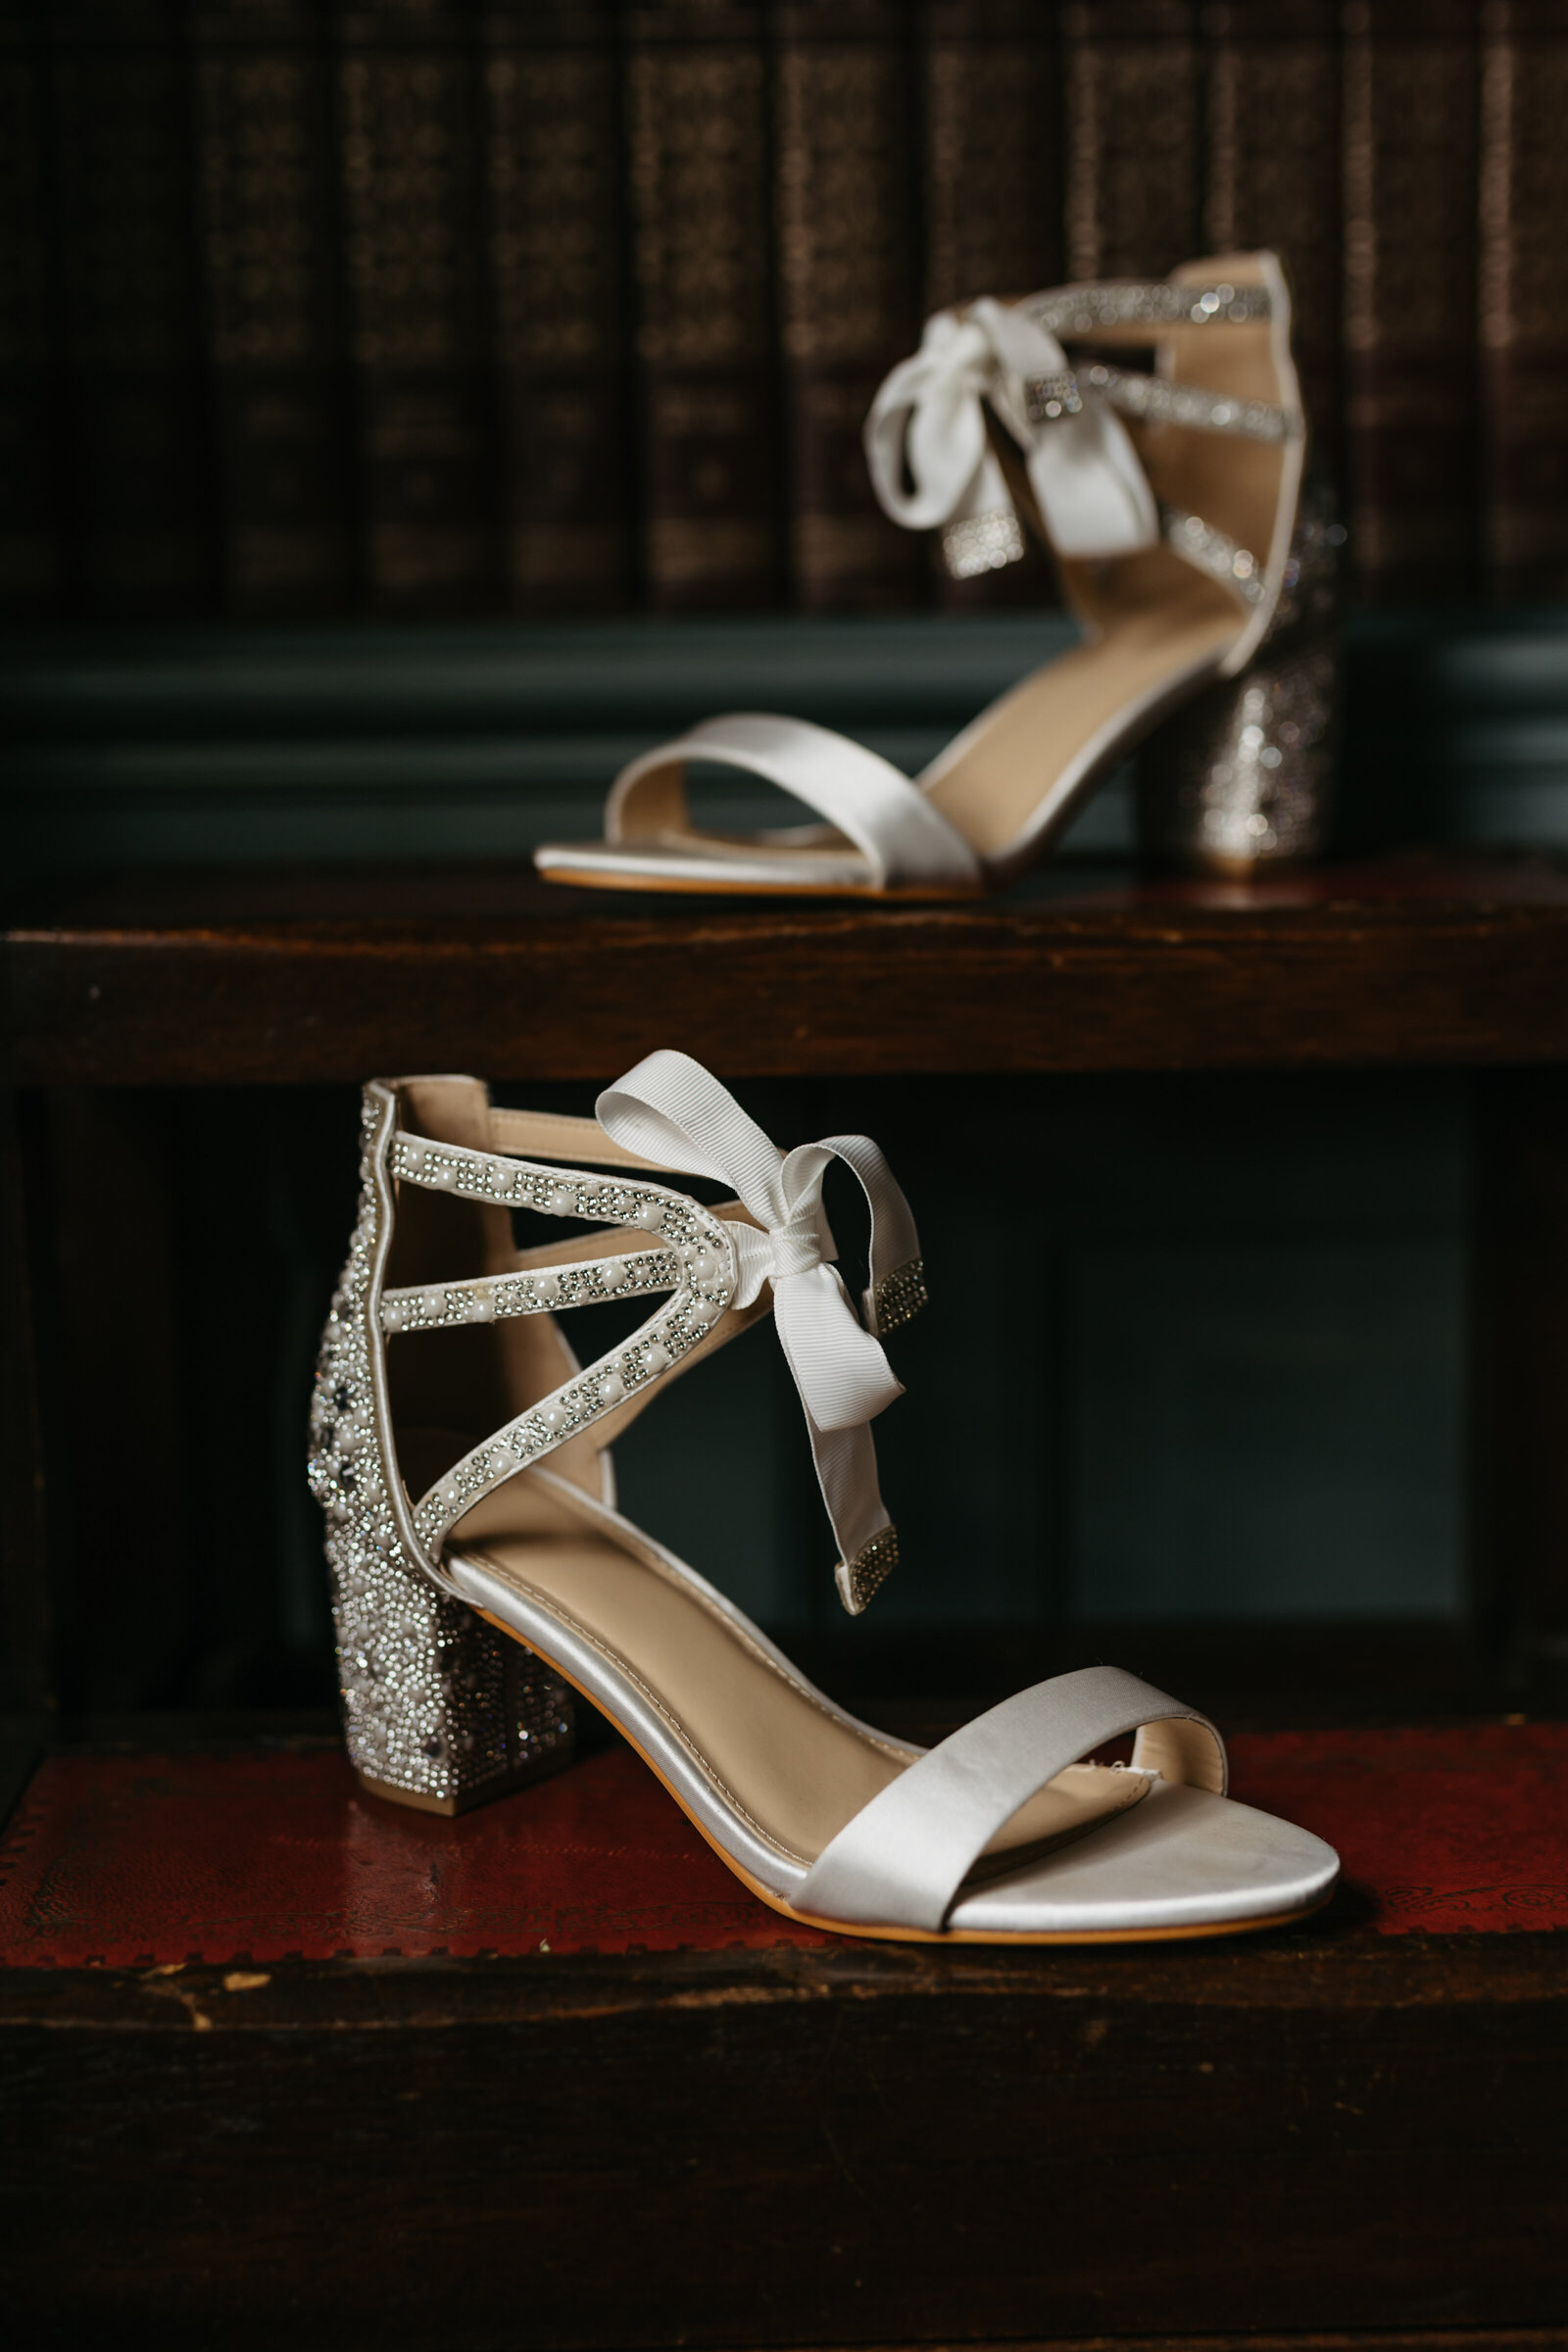 White wedding shoes sit in front of a bookshelf in a library